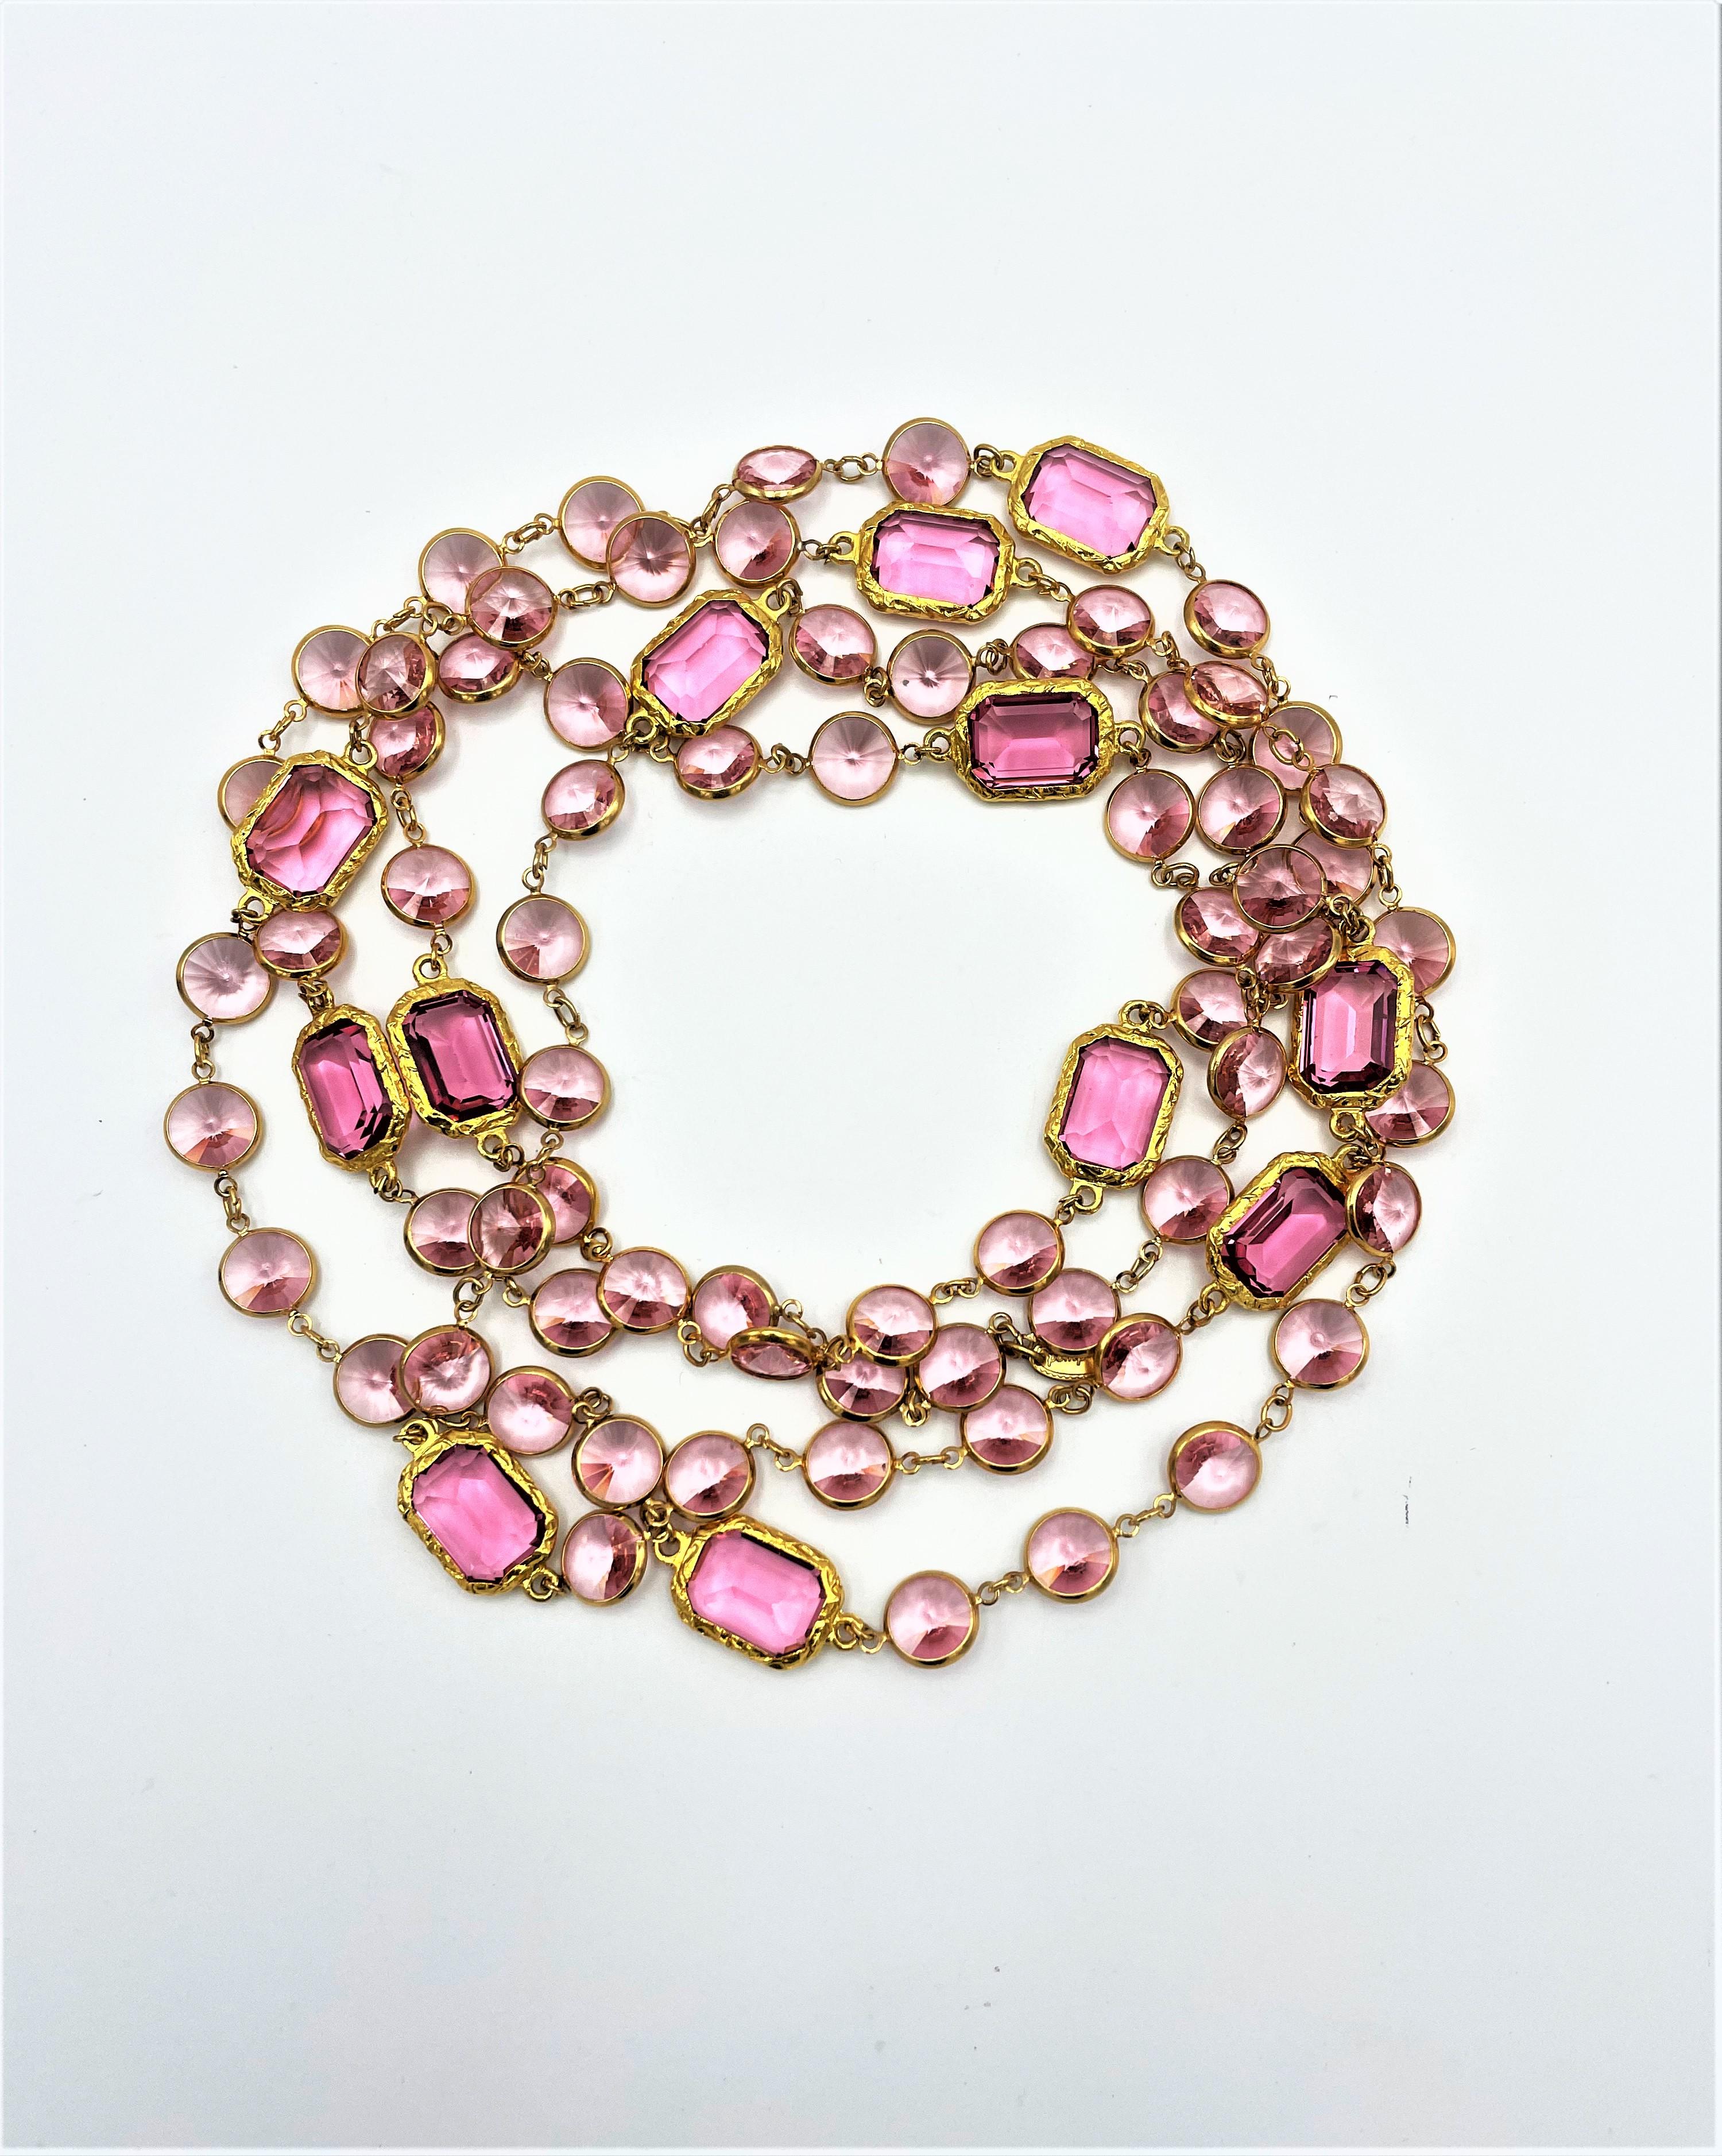 Modern  Necklace like the Chanel Chanel, pink Swarovski crystals gold plated, new  